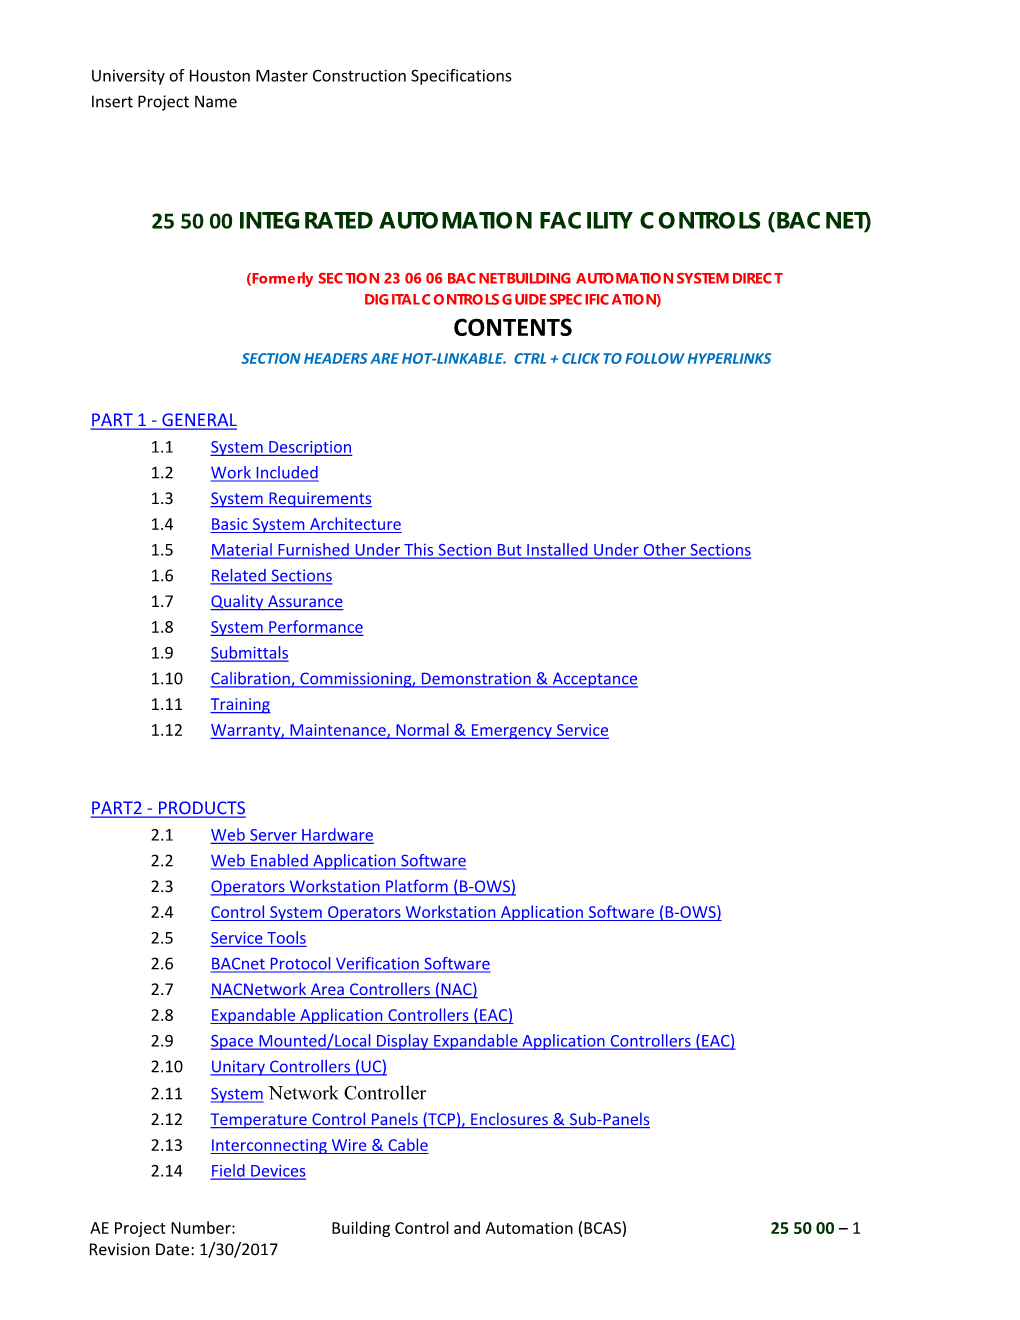 Bacnet Building Automation System Direct Digital Controls Guide Specification) Contents Section Headers Are Hot-Linkable